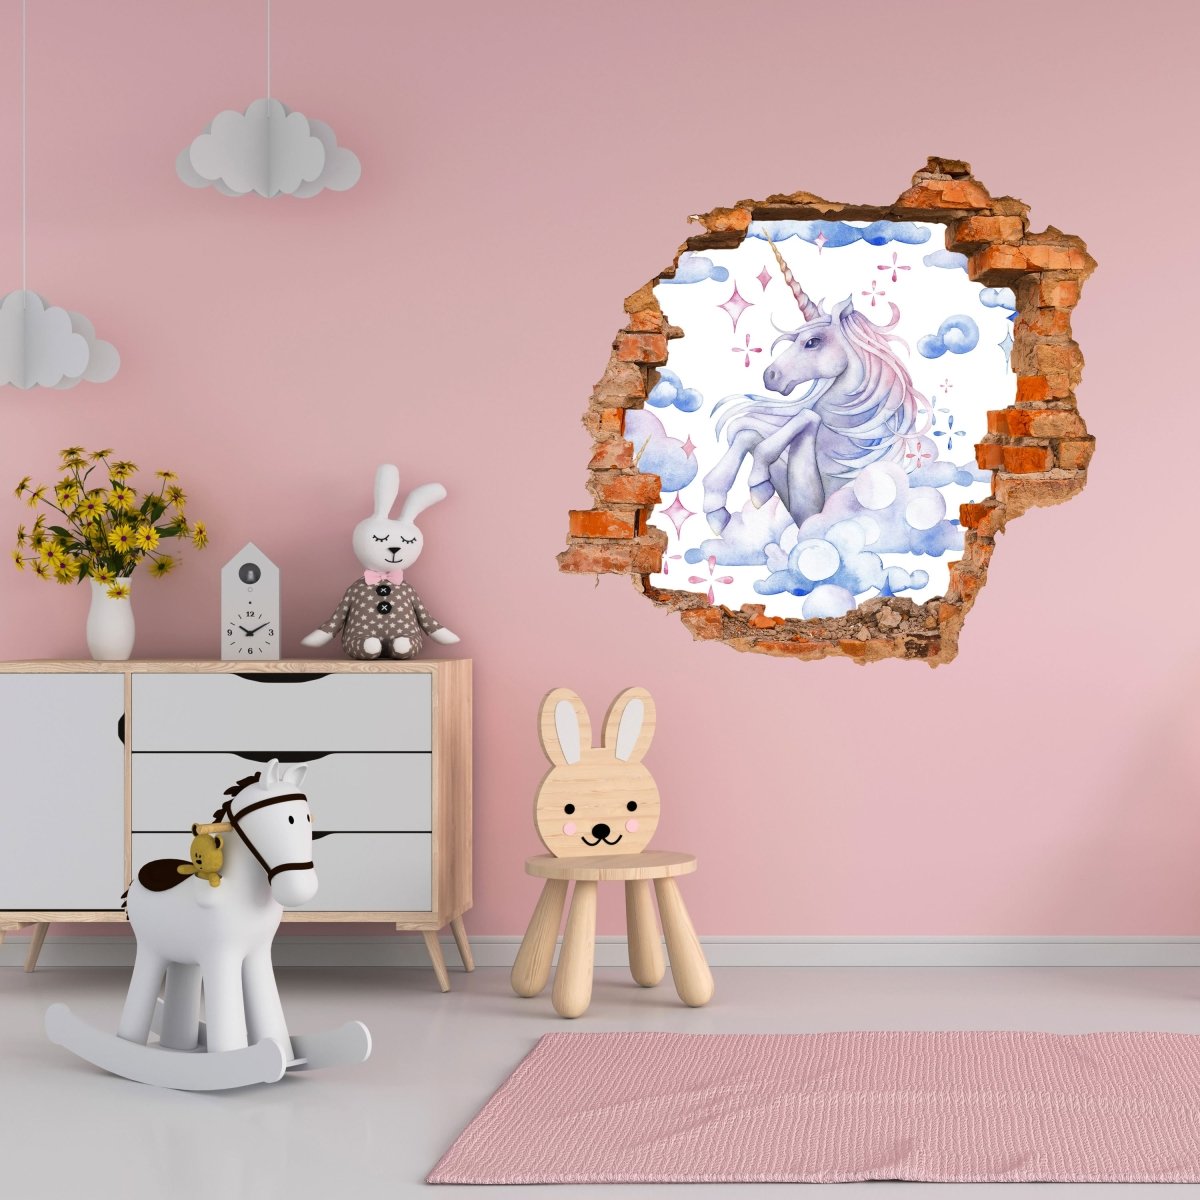 3D wall sticker watercolor unicorn, clouds, glitter, horse - Wall Decal M1289